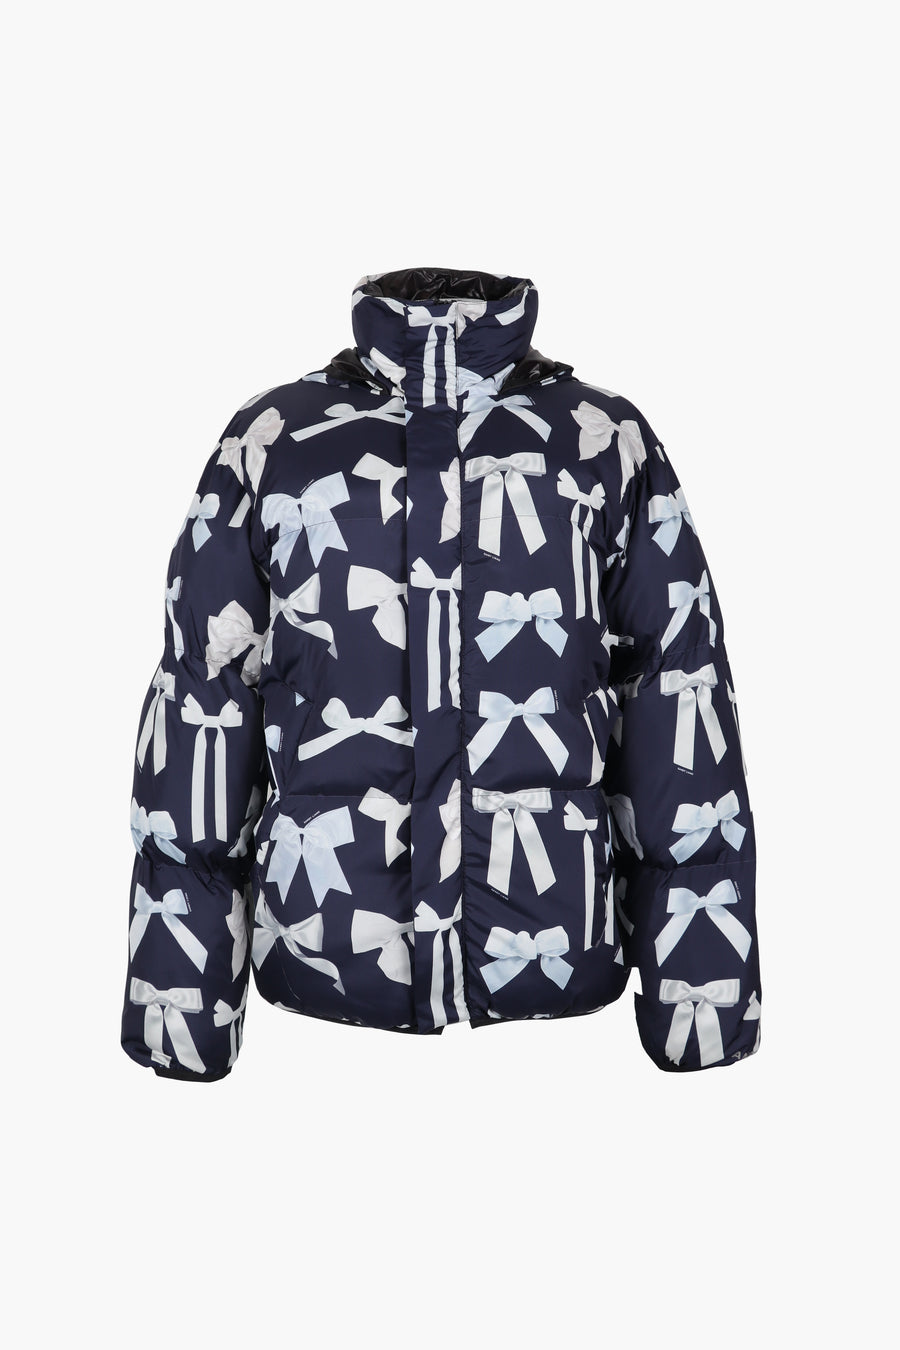 Puffer jacket in bow display print